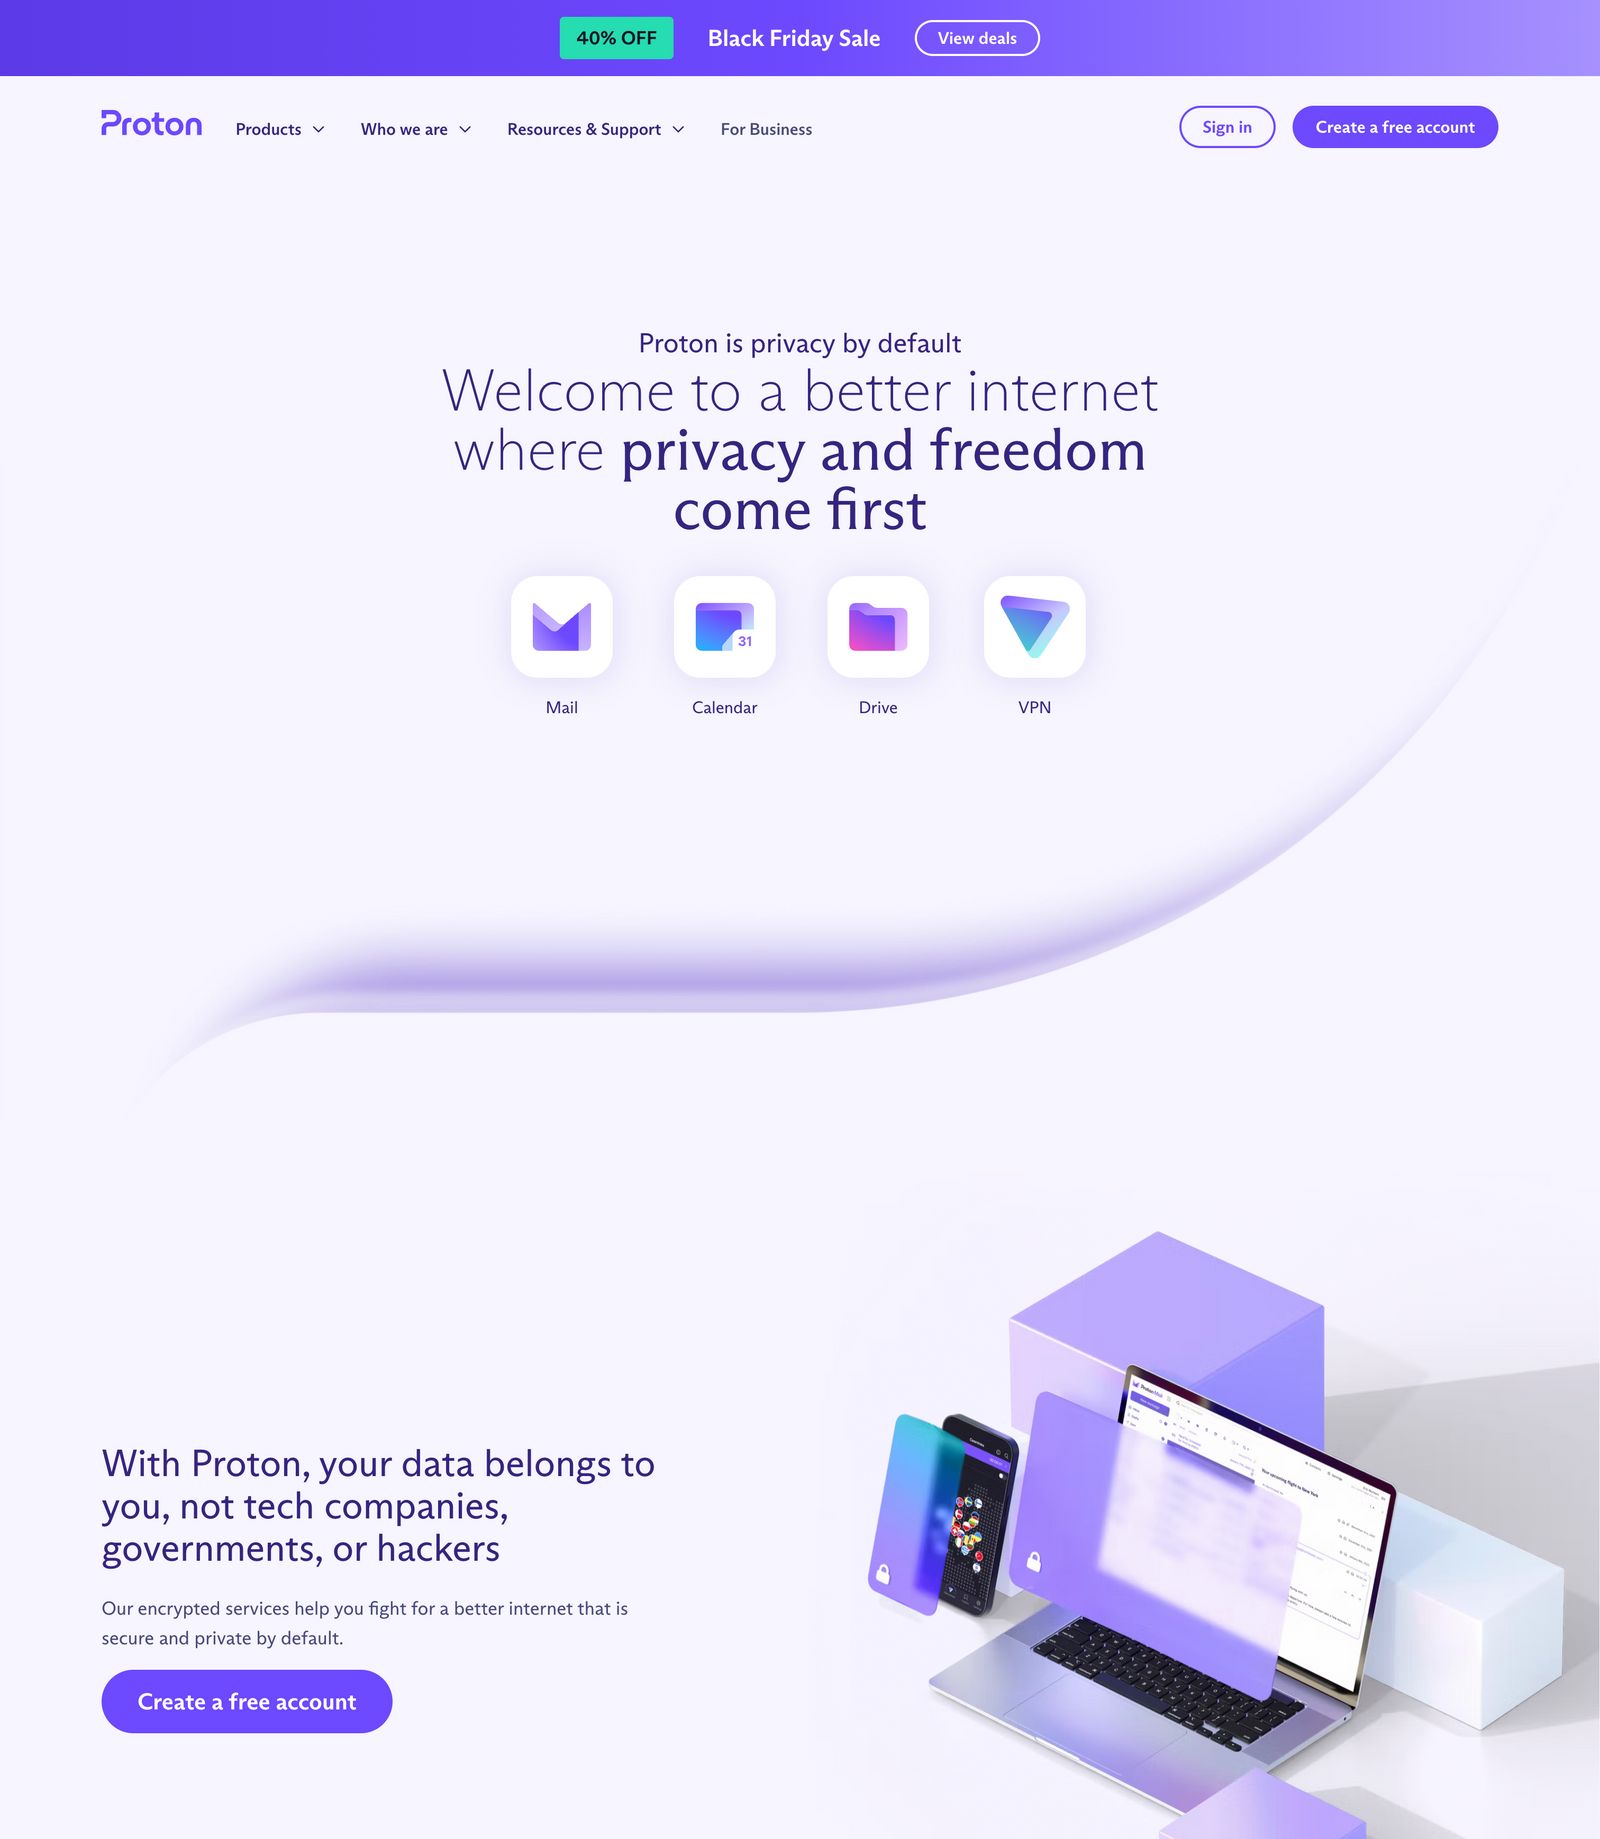 /articles/landing-page-inspiration/landing-page-design-example-8.jpg)_Saas Landing page example from Proton